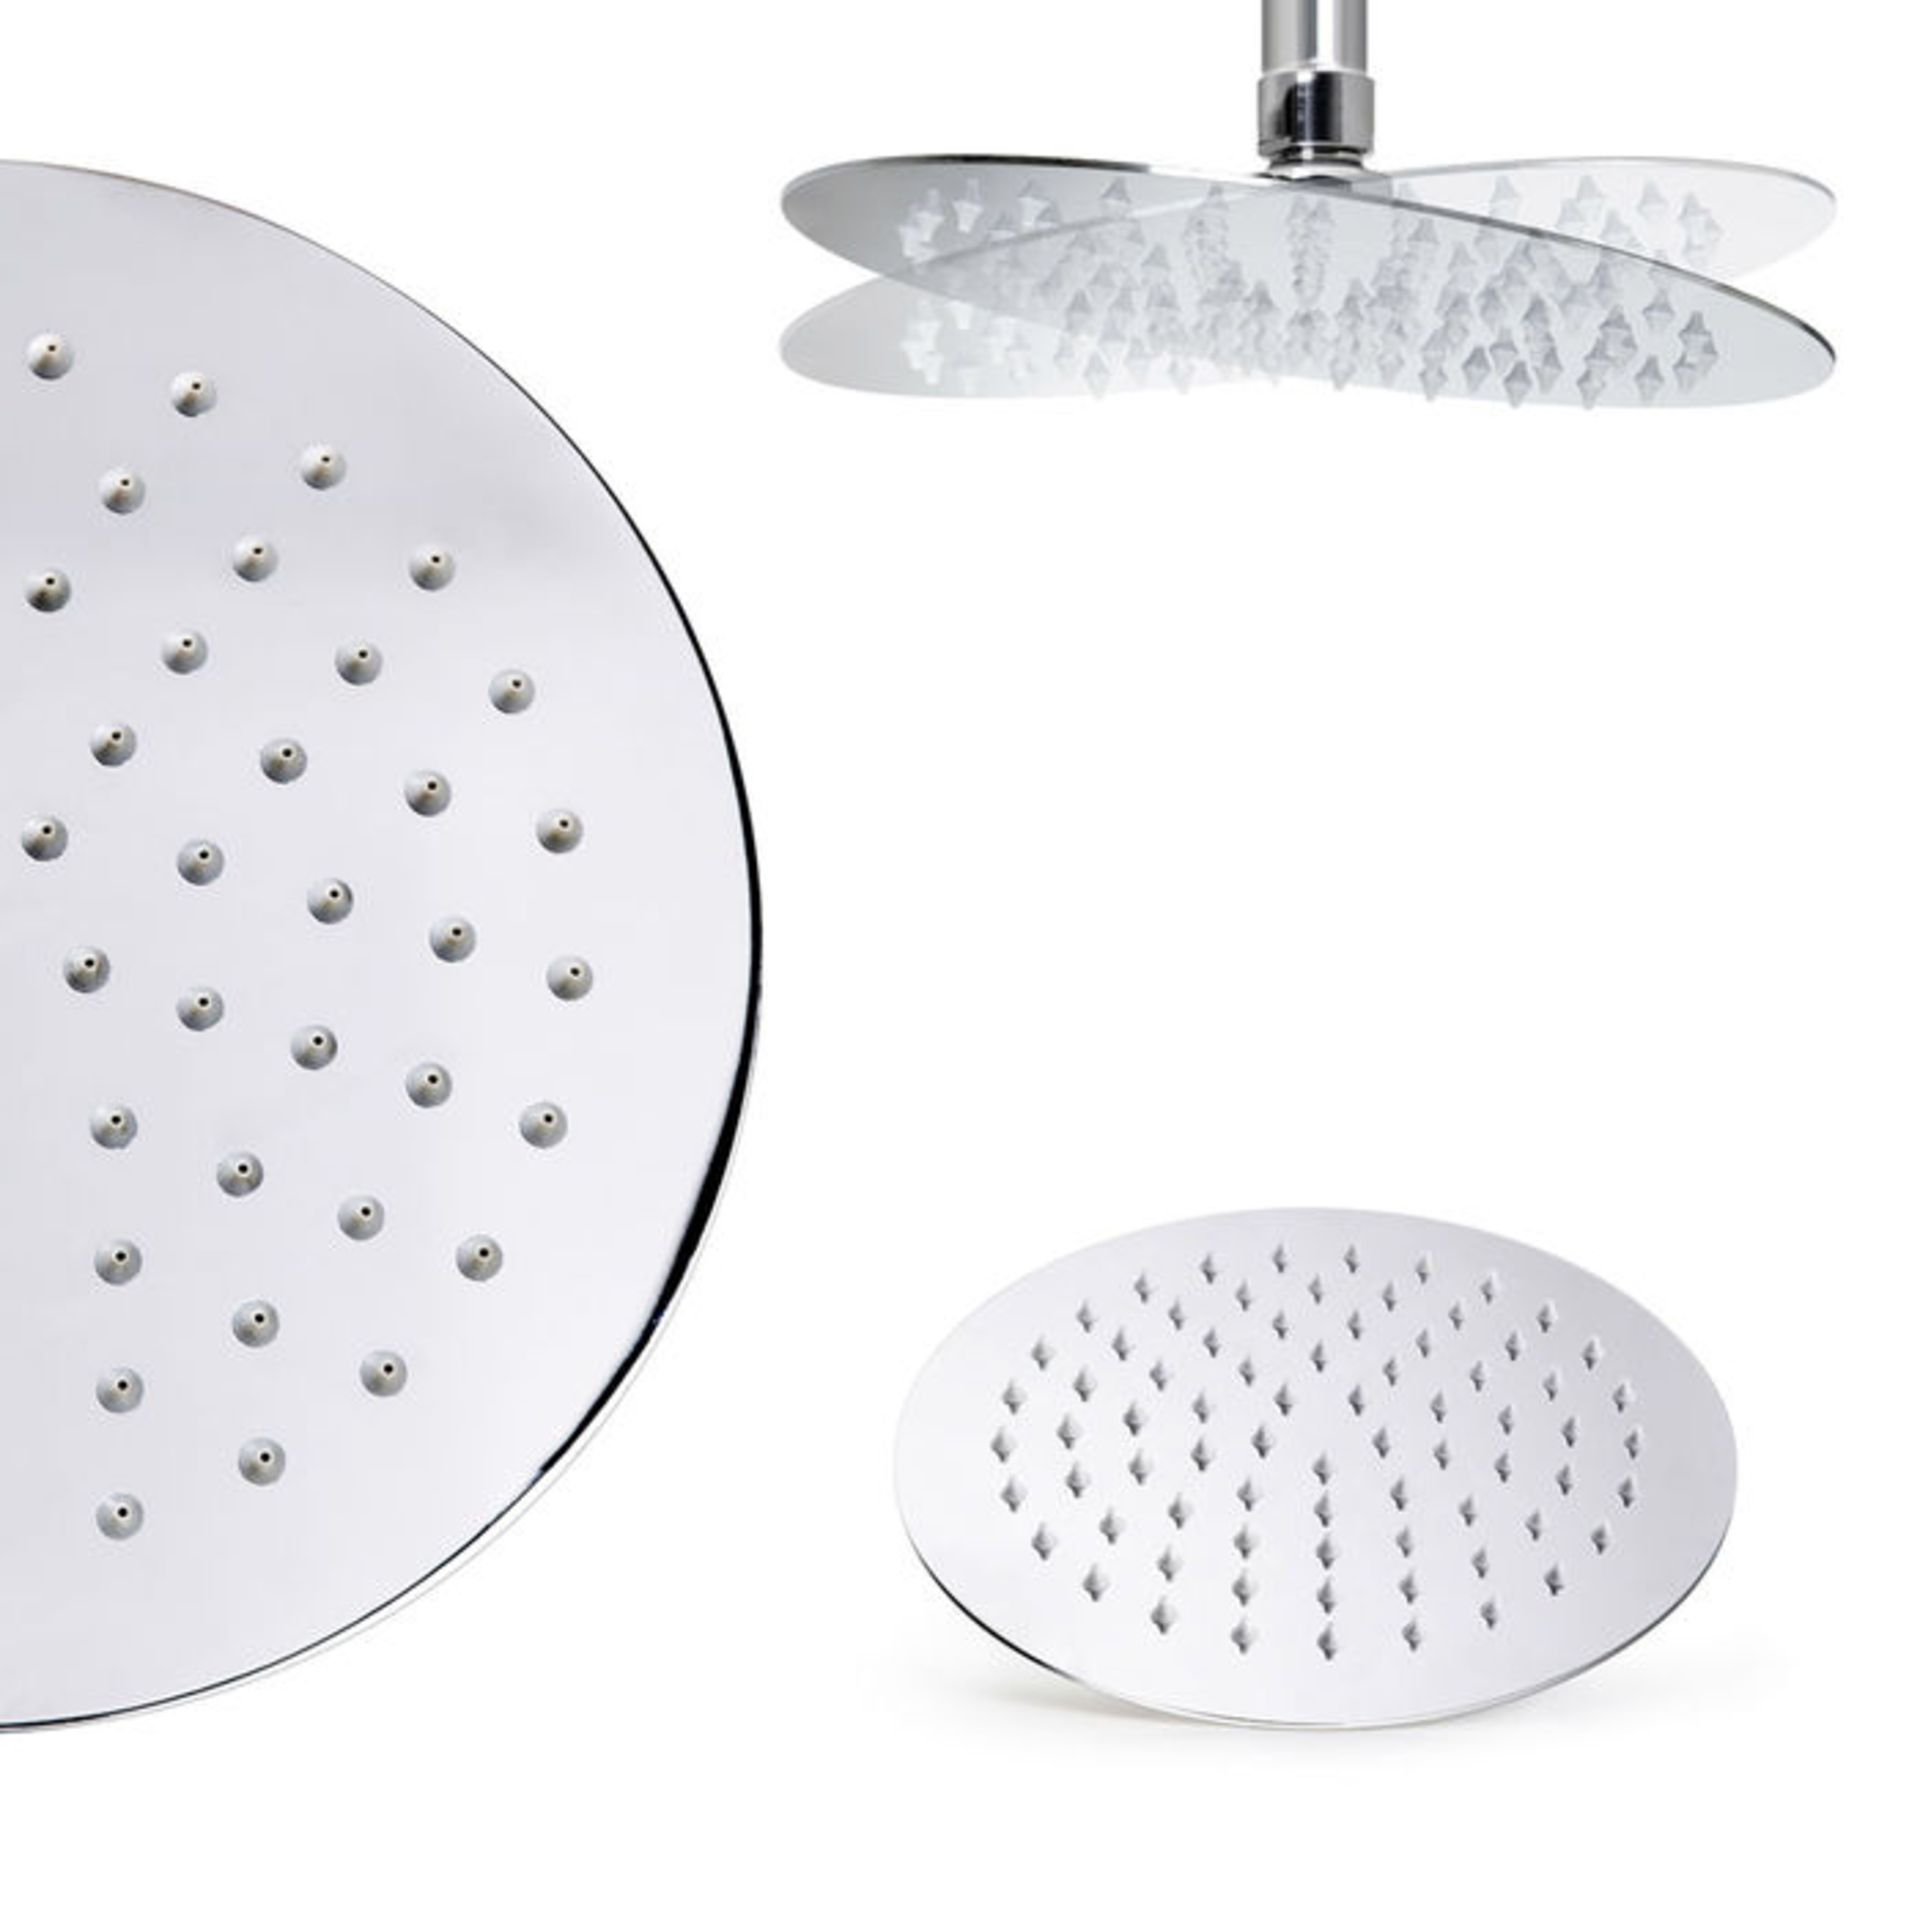 (VZ6) Stainless Steel 300mm Round Shower Head. Solid metal structure Can be wall or ceiling